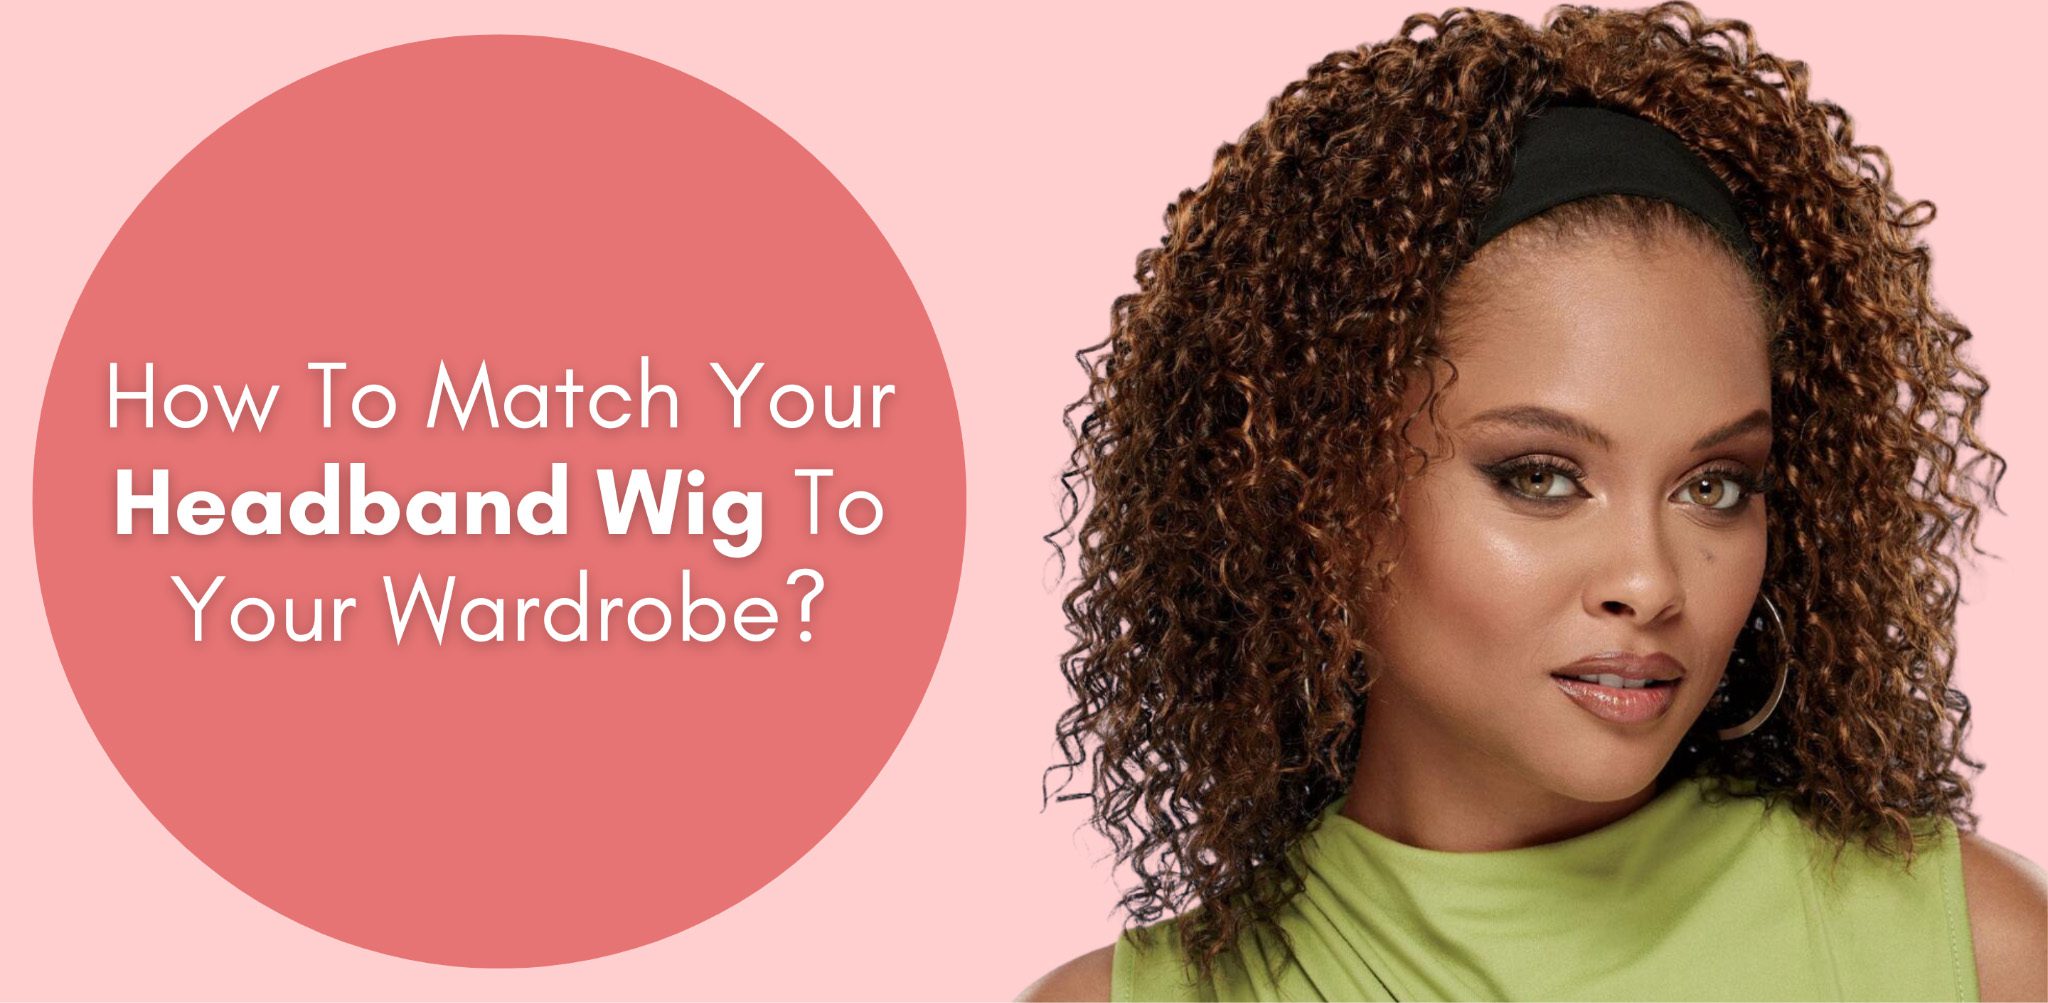 how to match your headband wig to your wardrobe